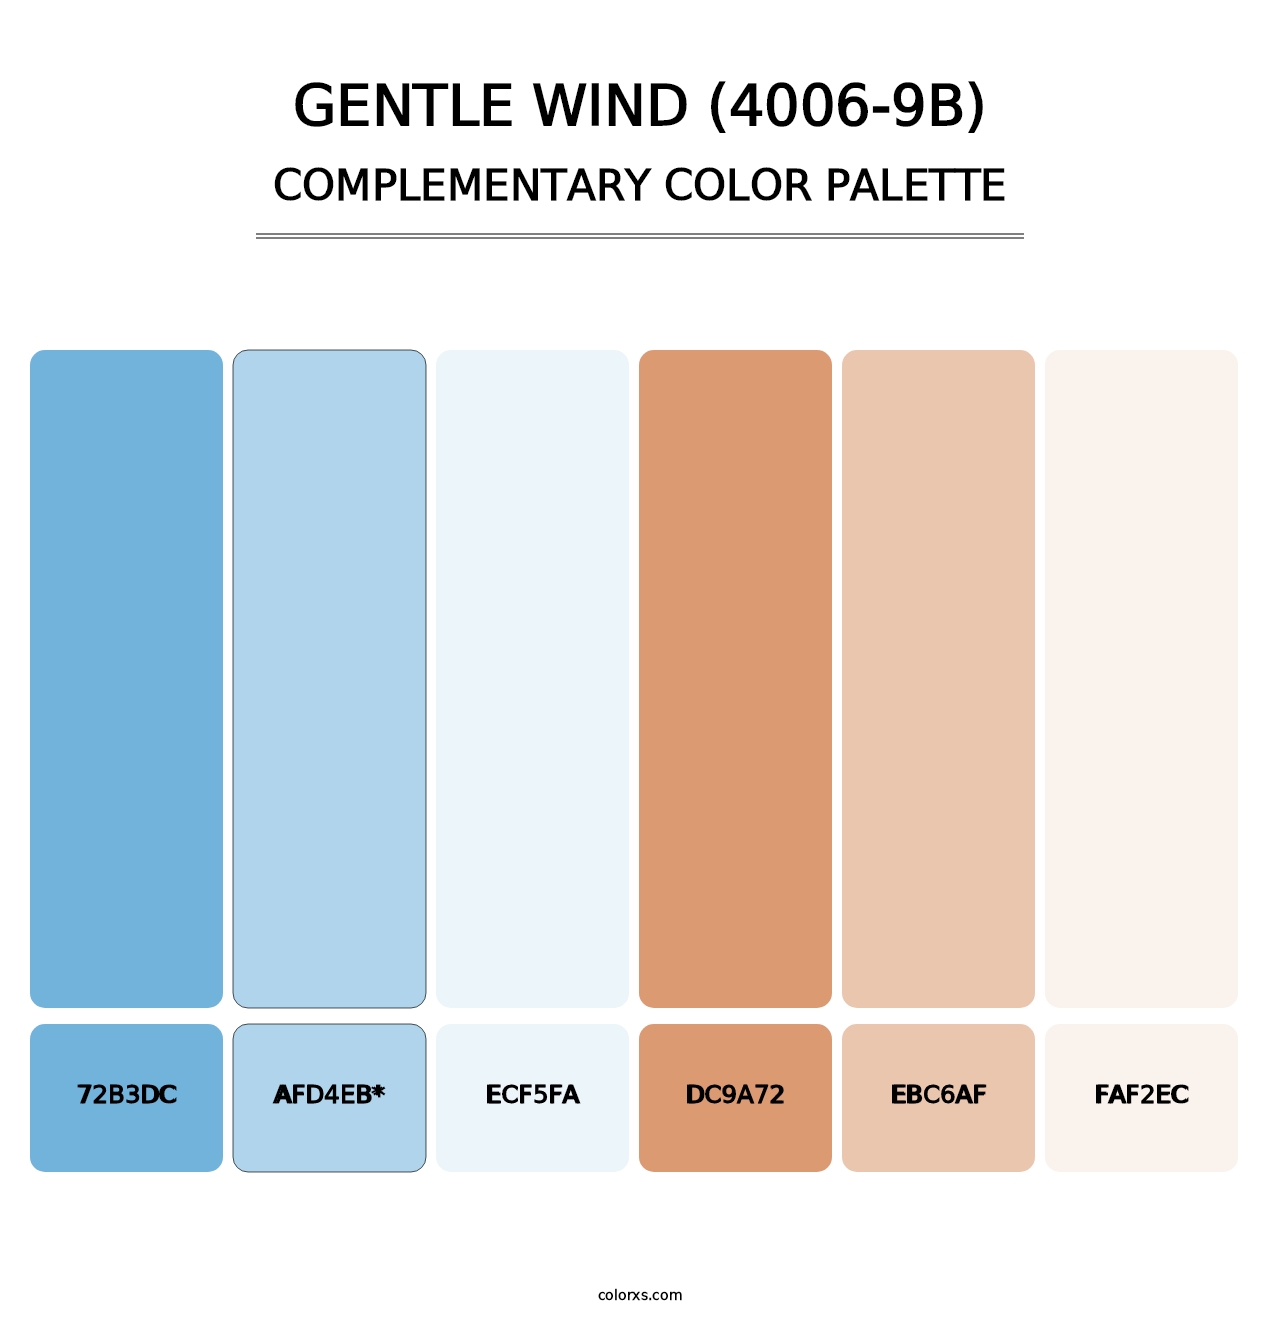 Gentle Wind (4006-9B) - Complementary Color Palette